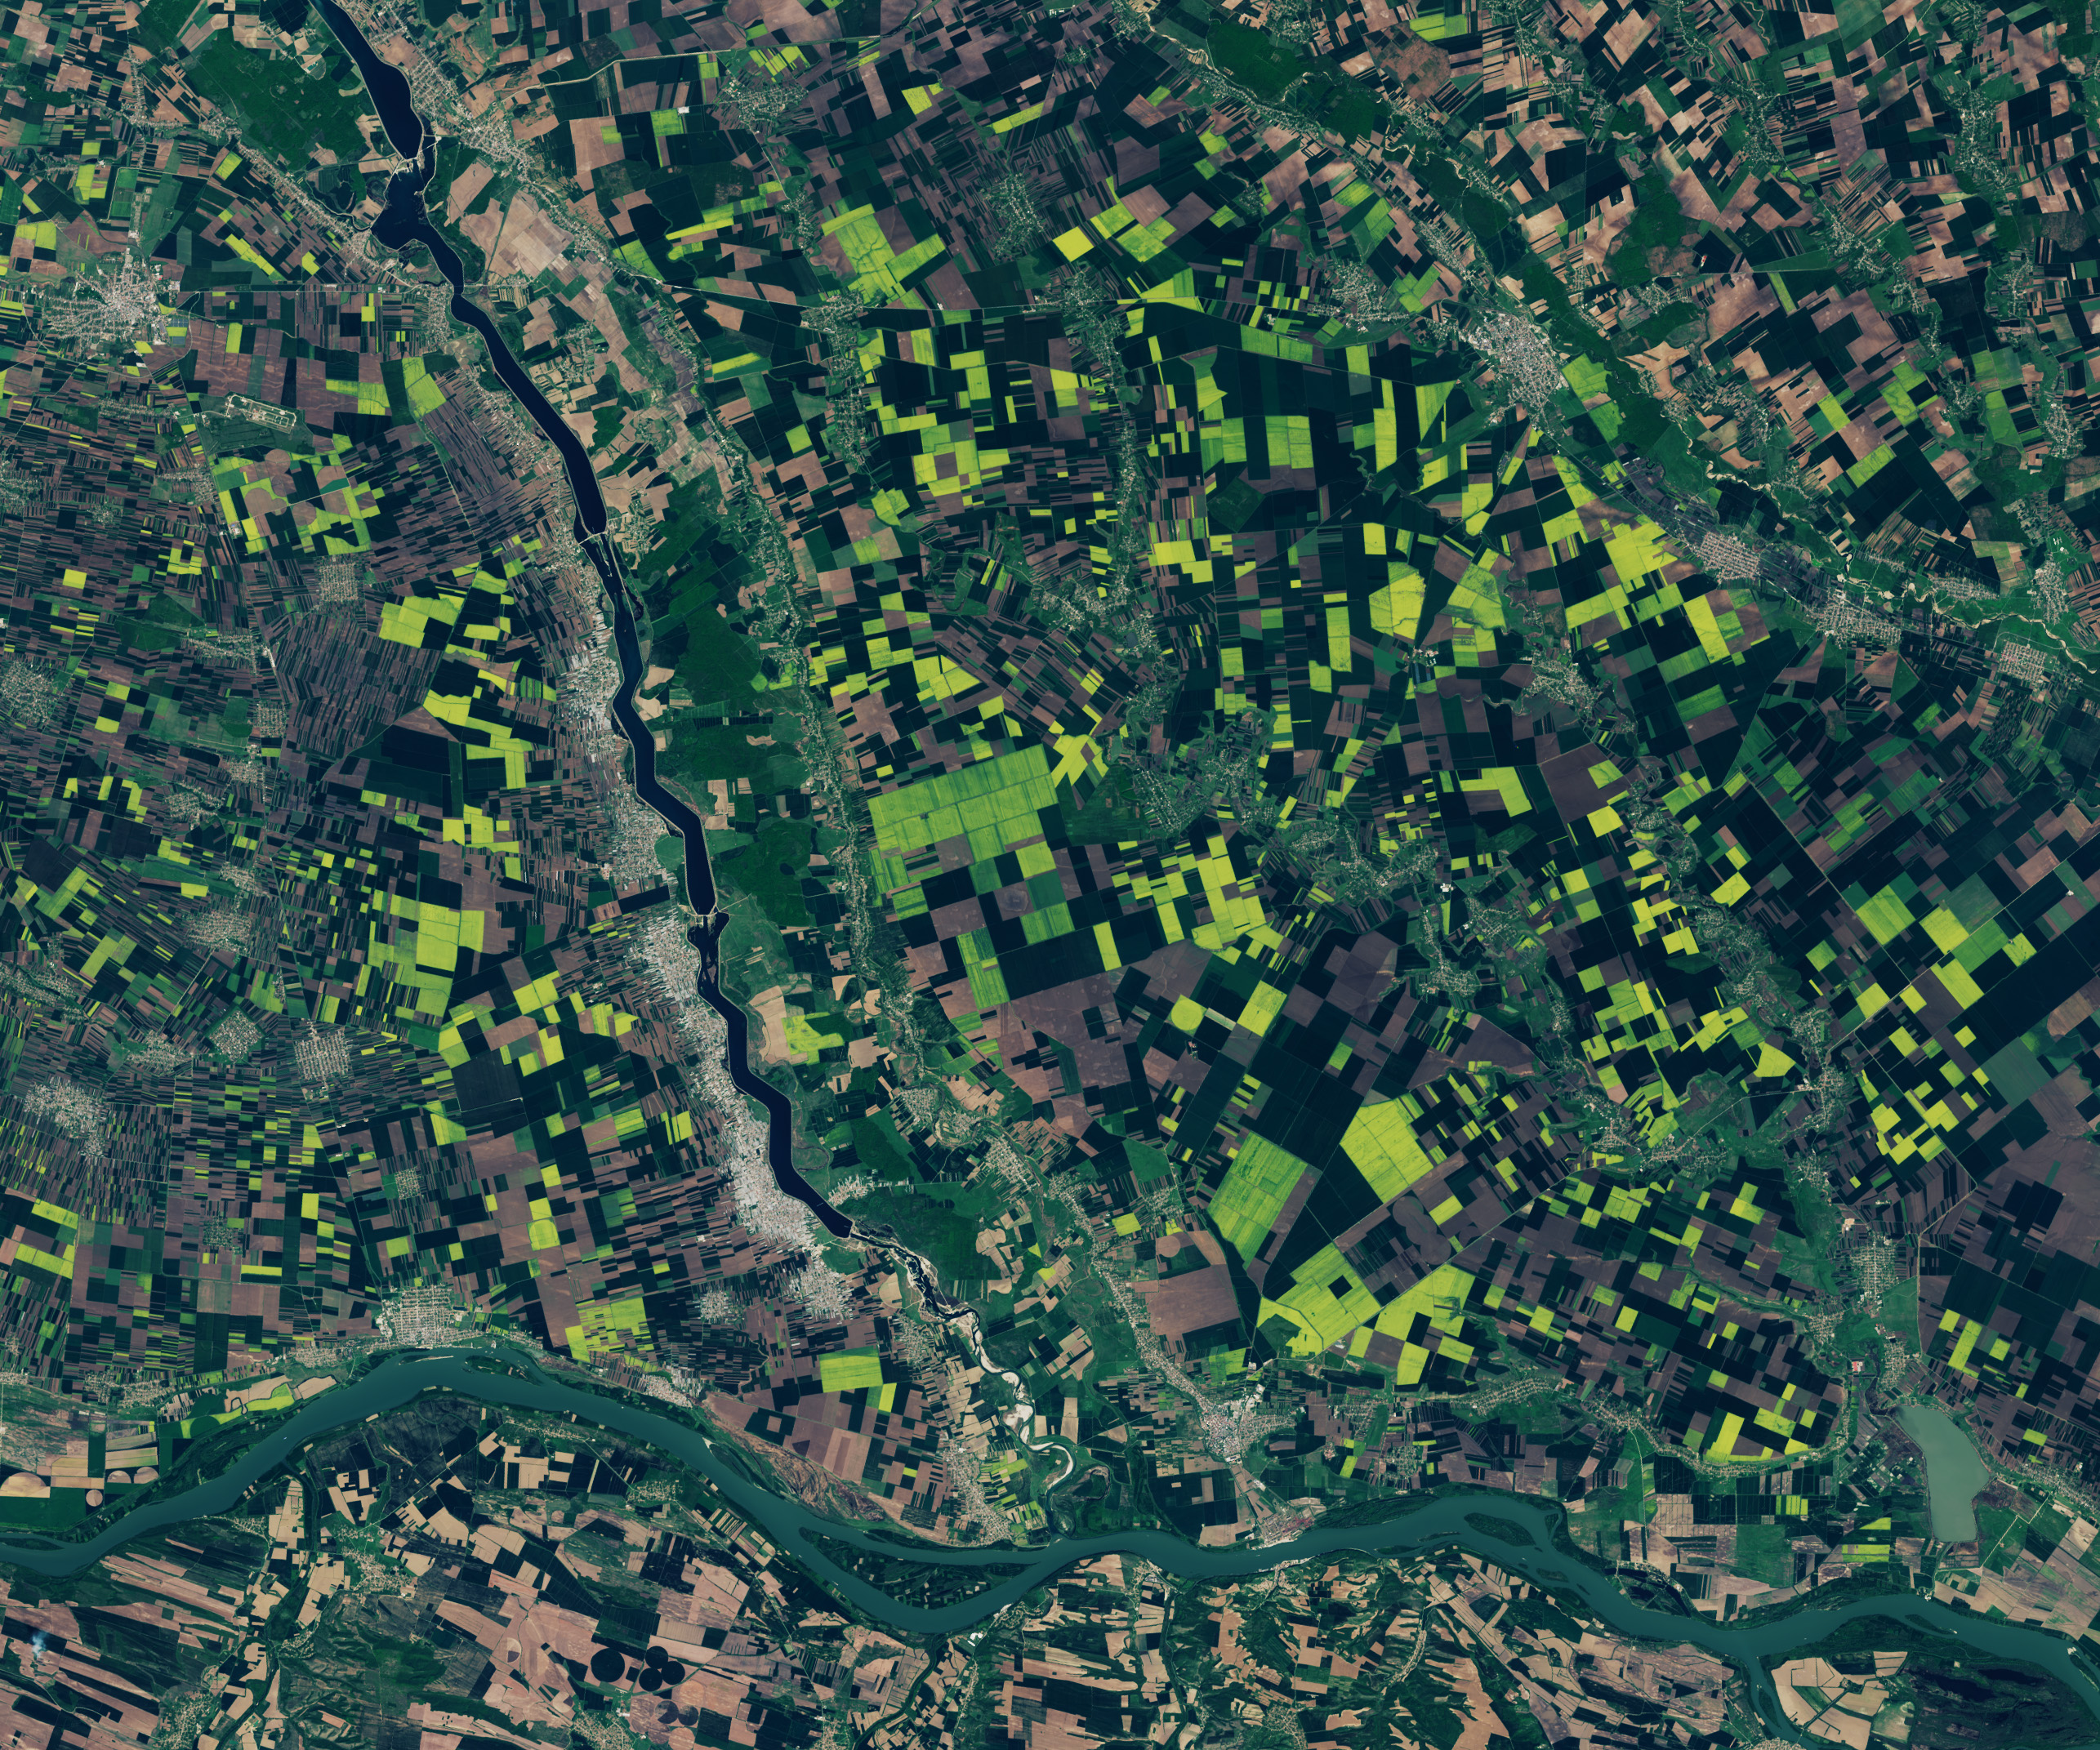 confluence of Olt River with the danube show. Danube is larger, flowing along the bottom of the image, with Olt coming from top left to meet the Danube bottom center. above the Danube numerous field rectangles can be distinguished, covering the landscape. some black, some brown, but many a vibrant green, even tinged yellow.